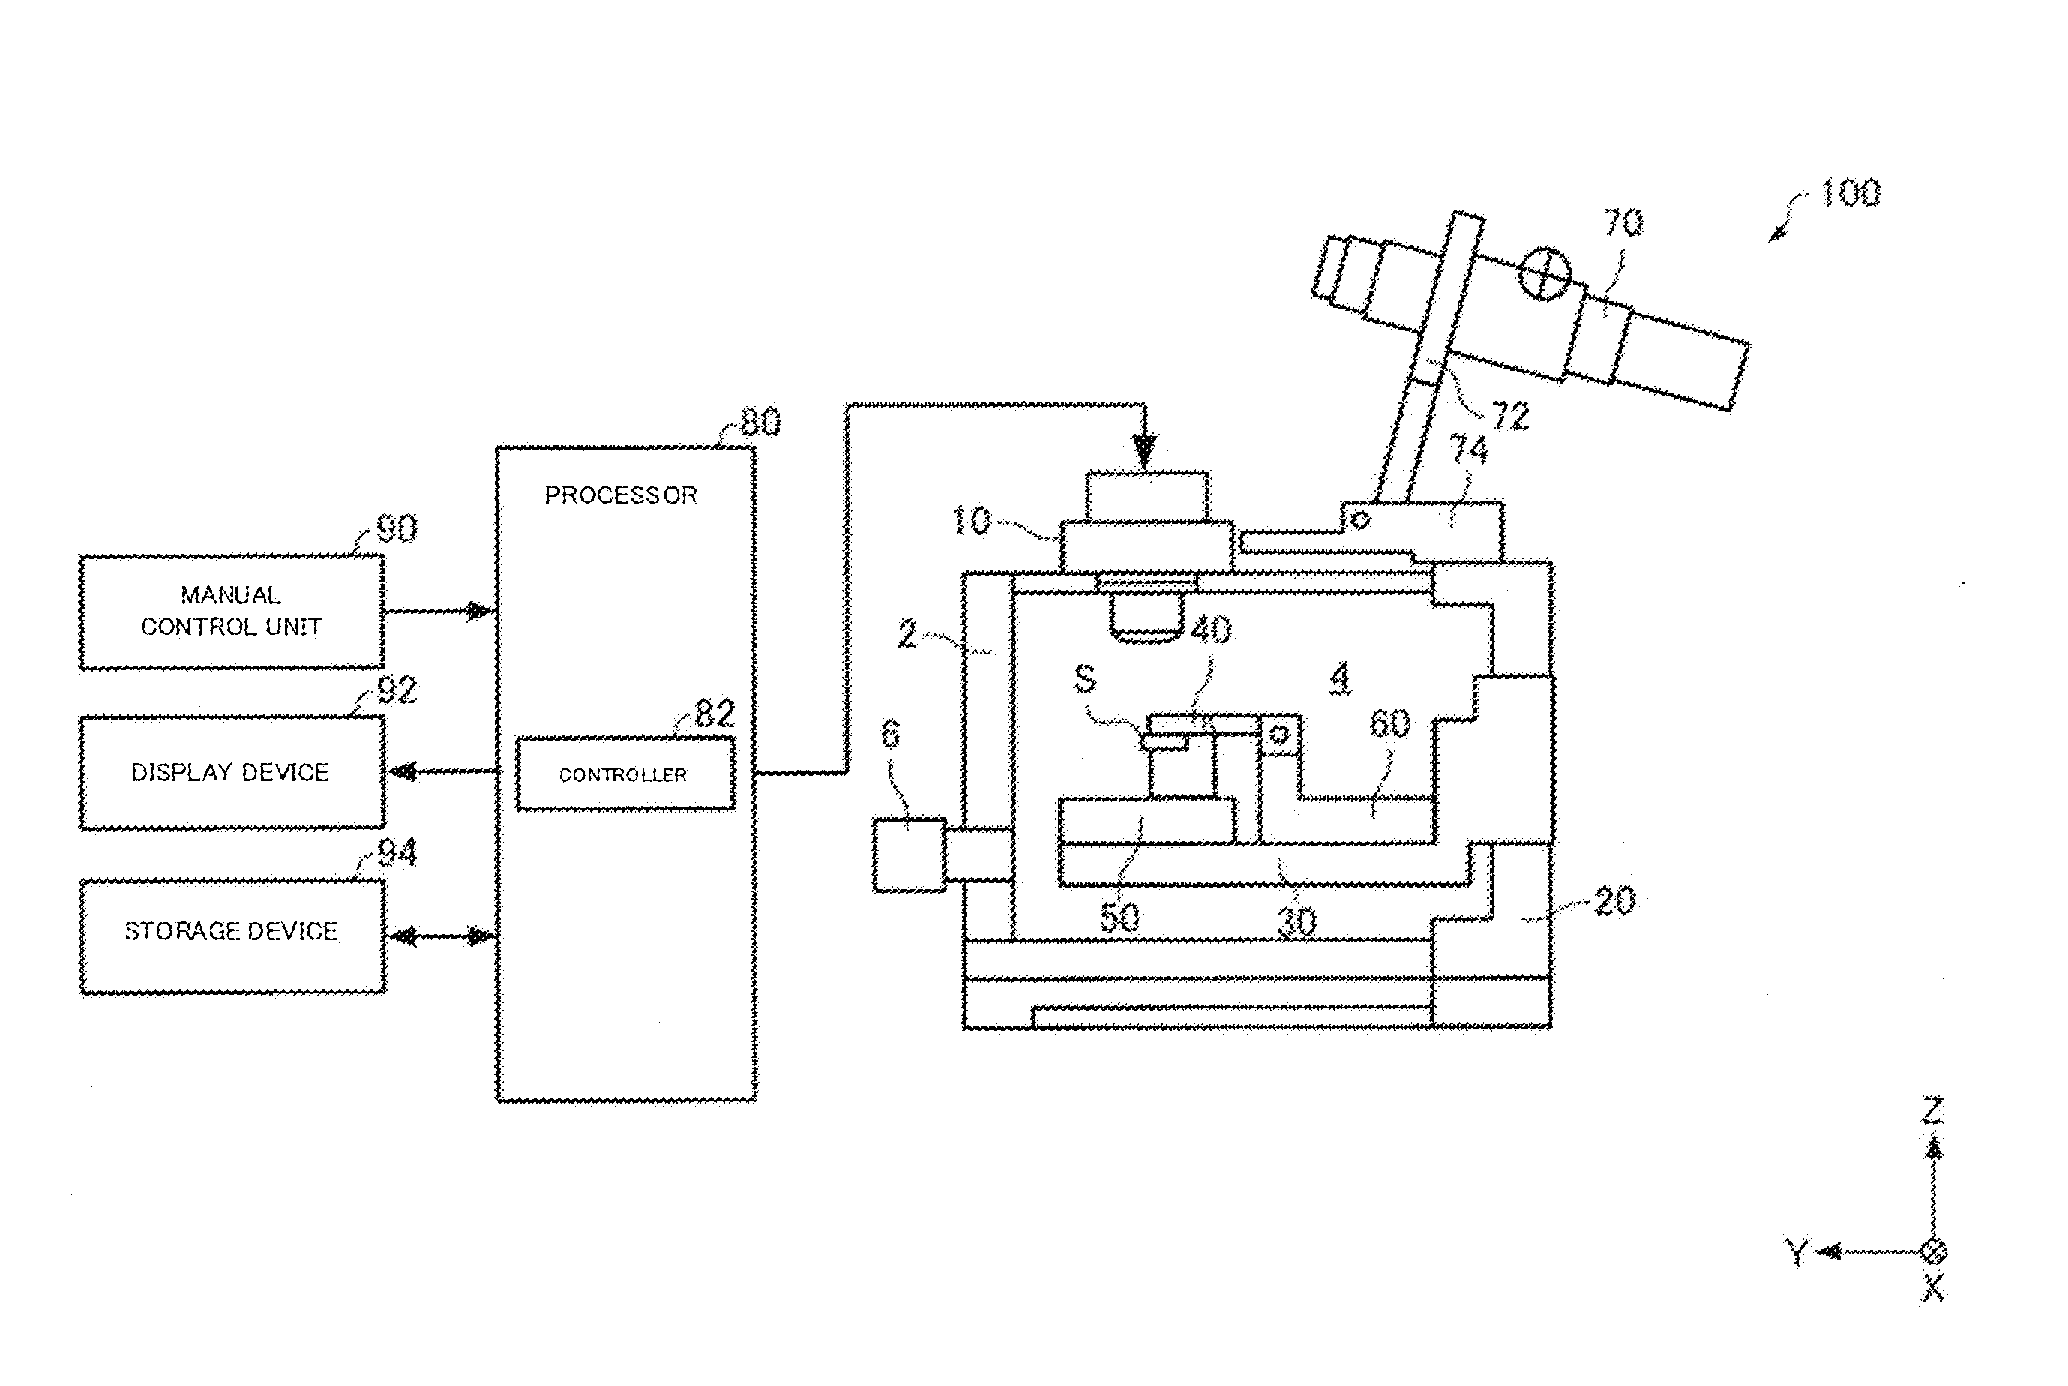 Apparatus and Method for Sample Preparation